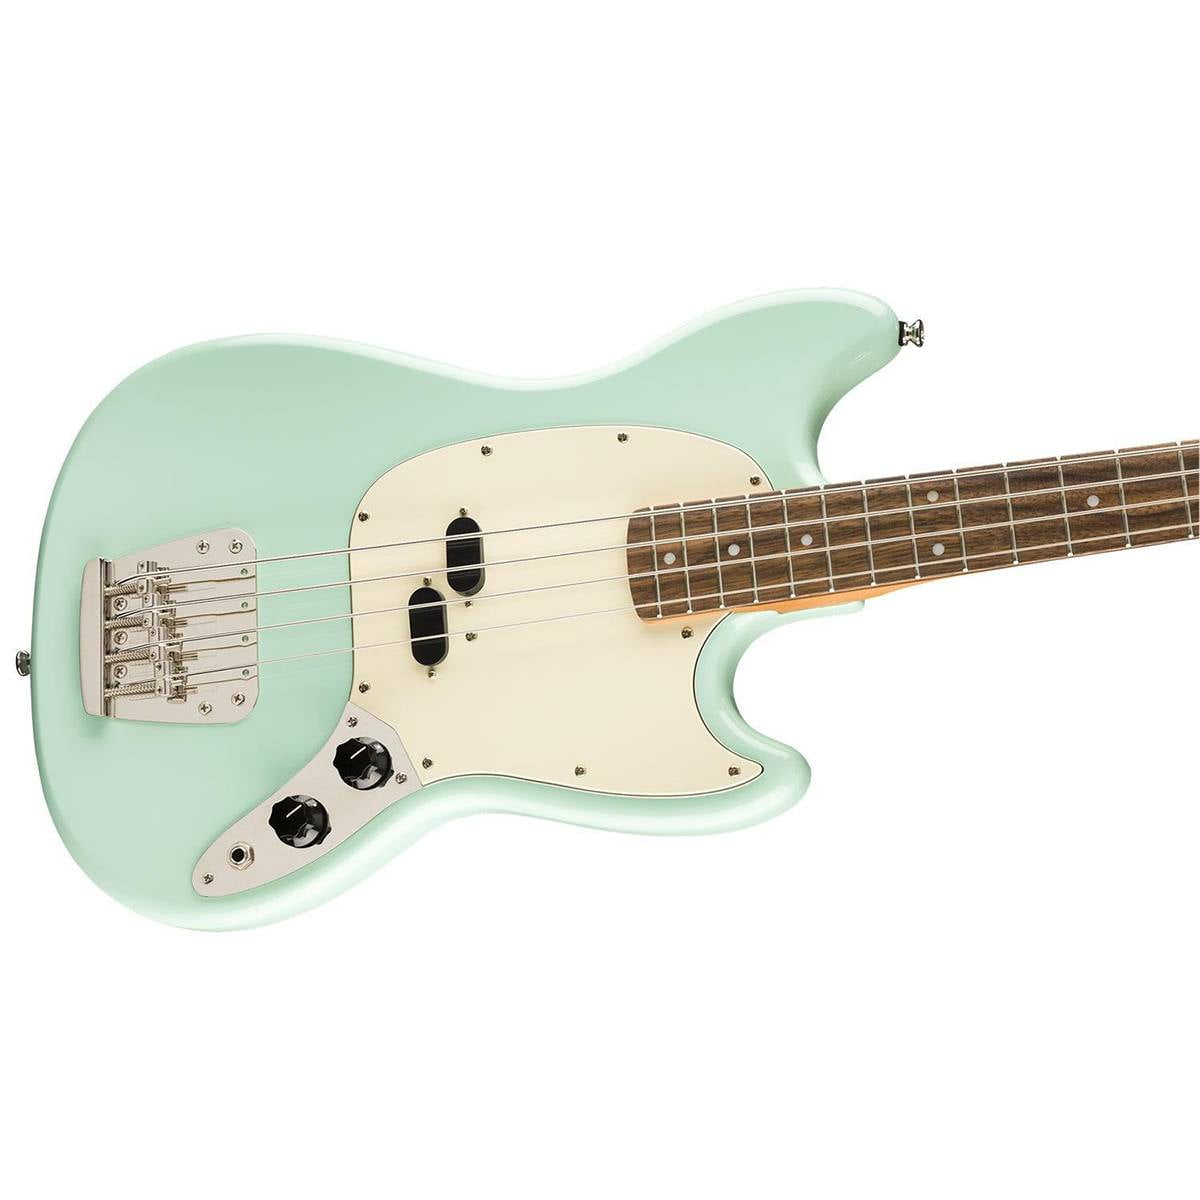 Squier Classic Vibe '60s Mustang Bass Guitar (Surf Green)